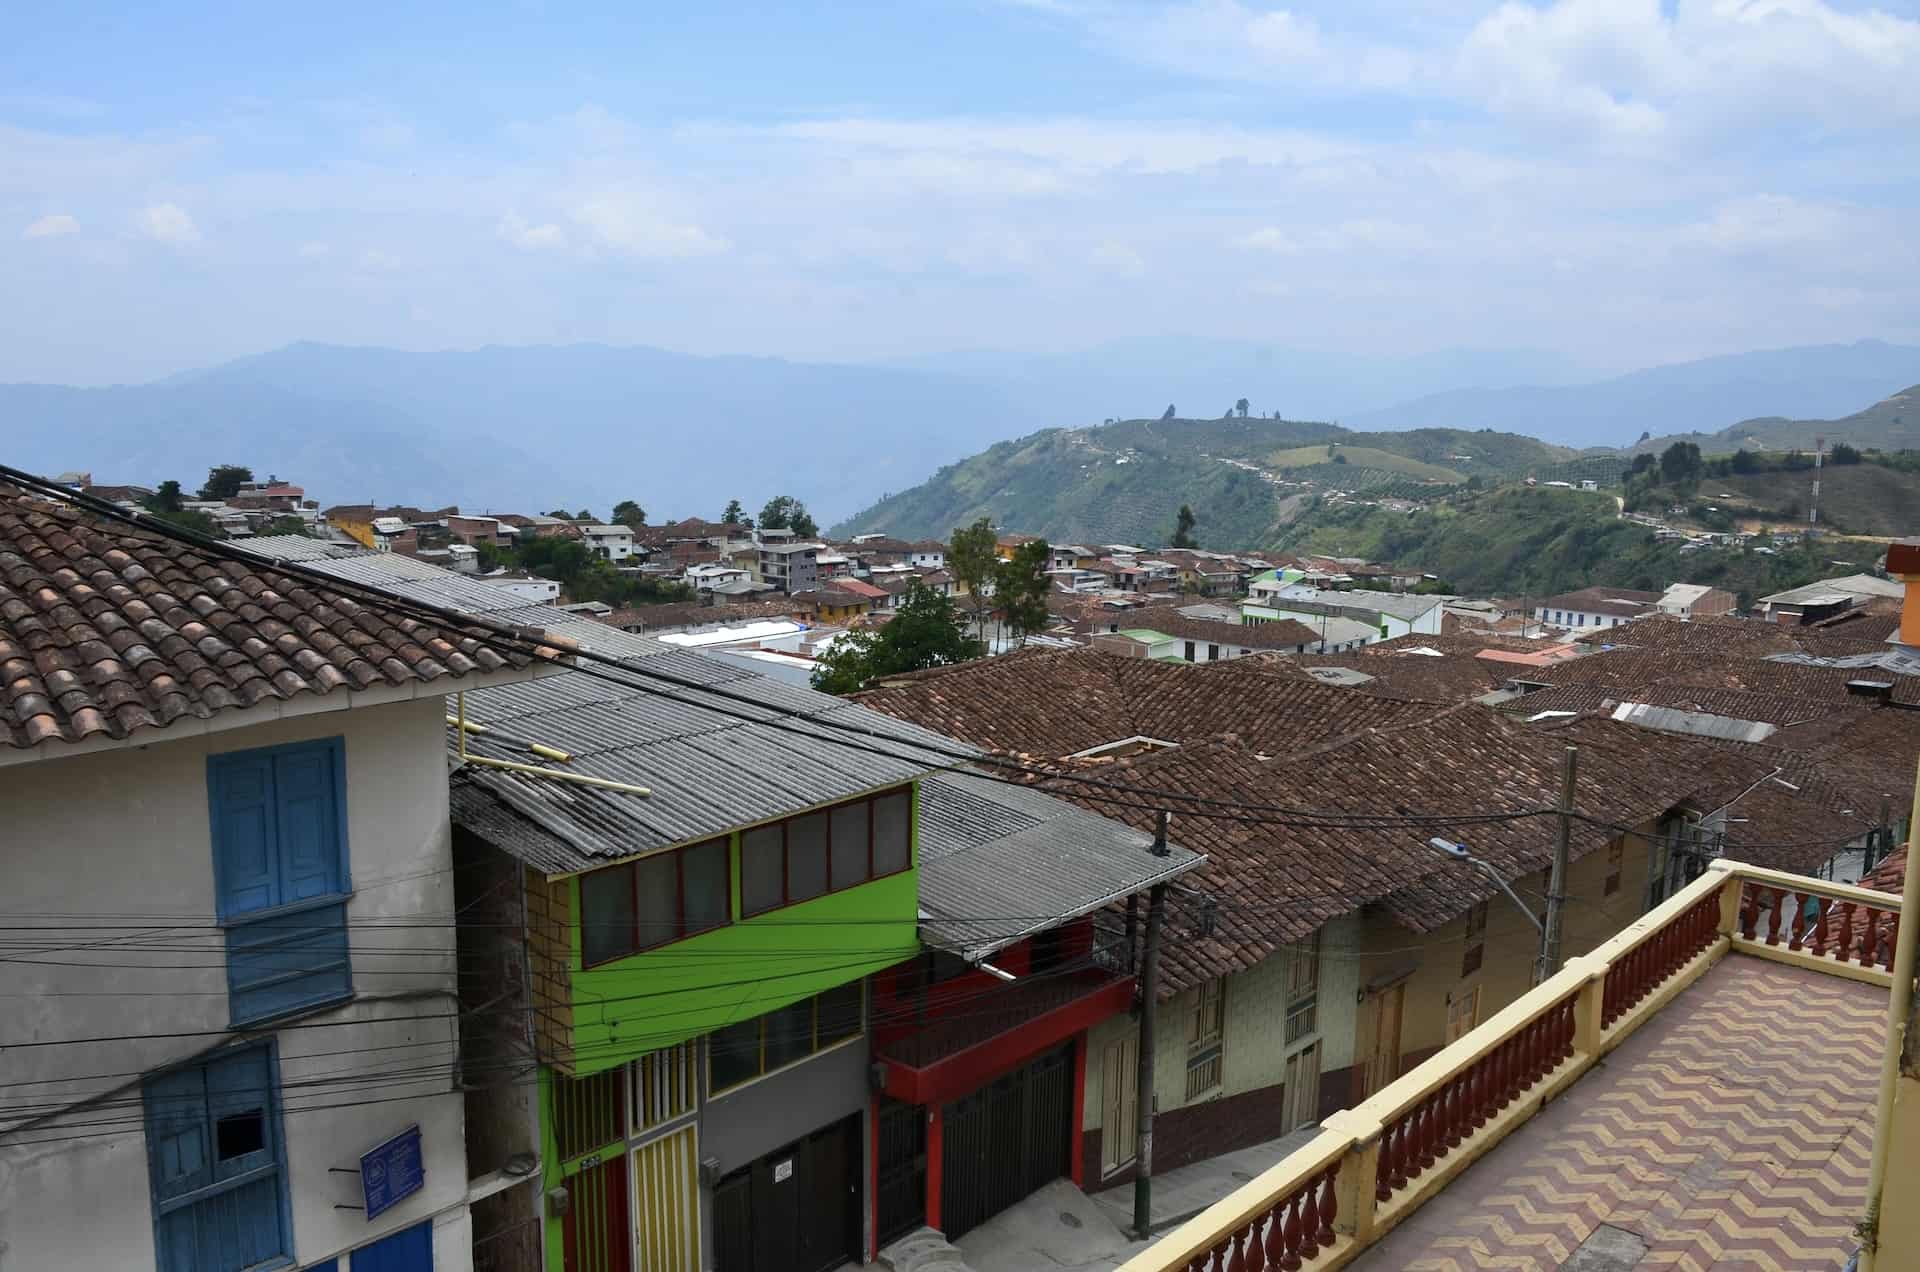 View from the balcony of the Francisco Giraldo Cultural Center